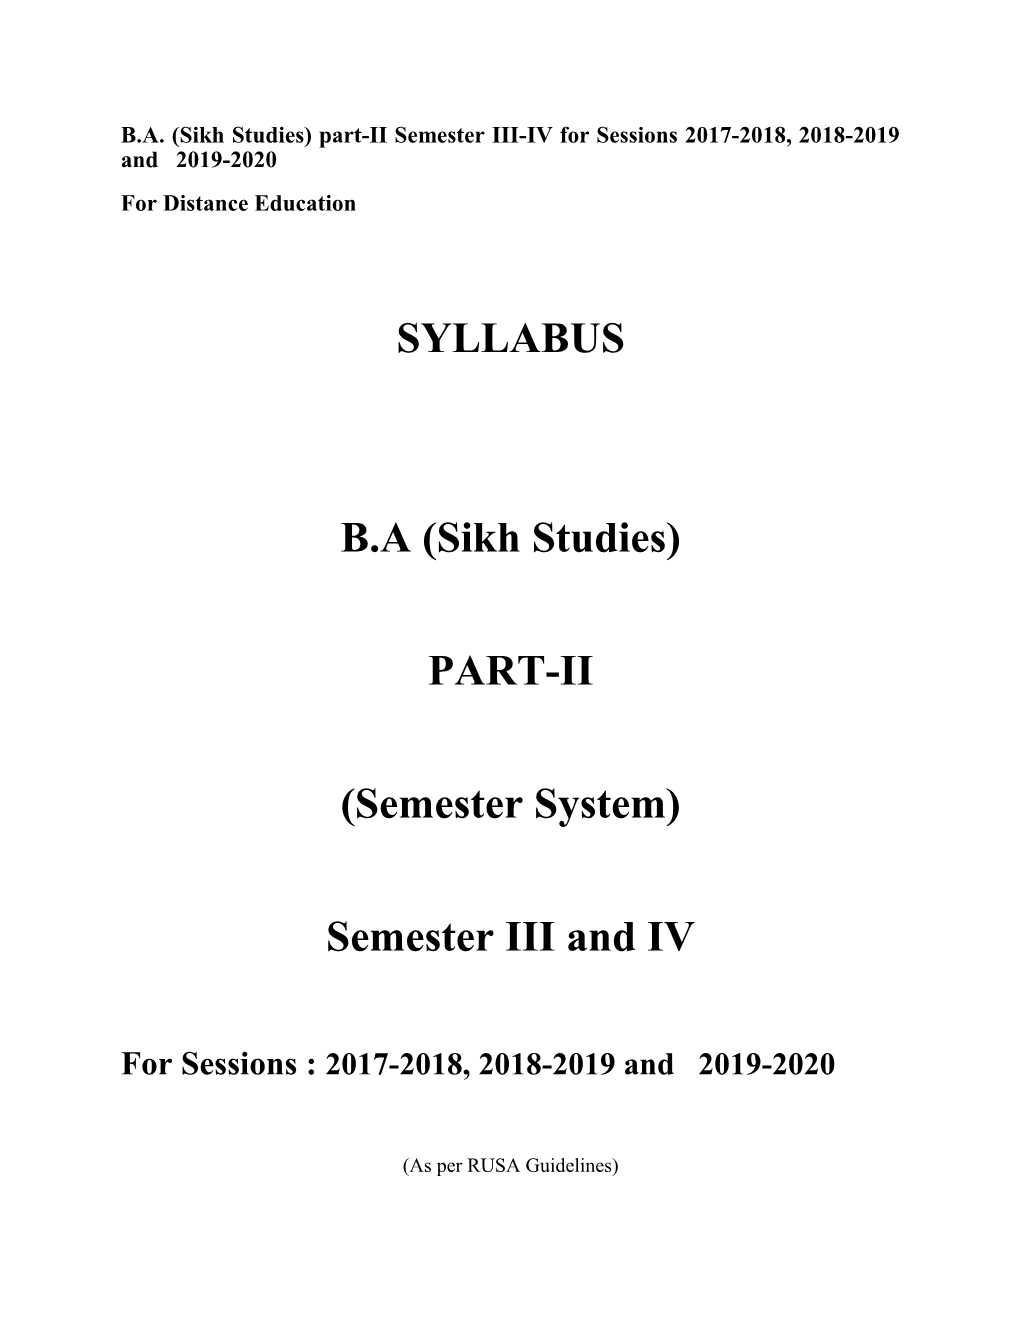 B.A. (Sikh Studies) Part-II Semester III-IV for Sessions 2017-2018, 2018-2019 and 2019-2020